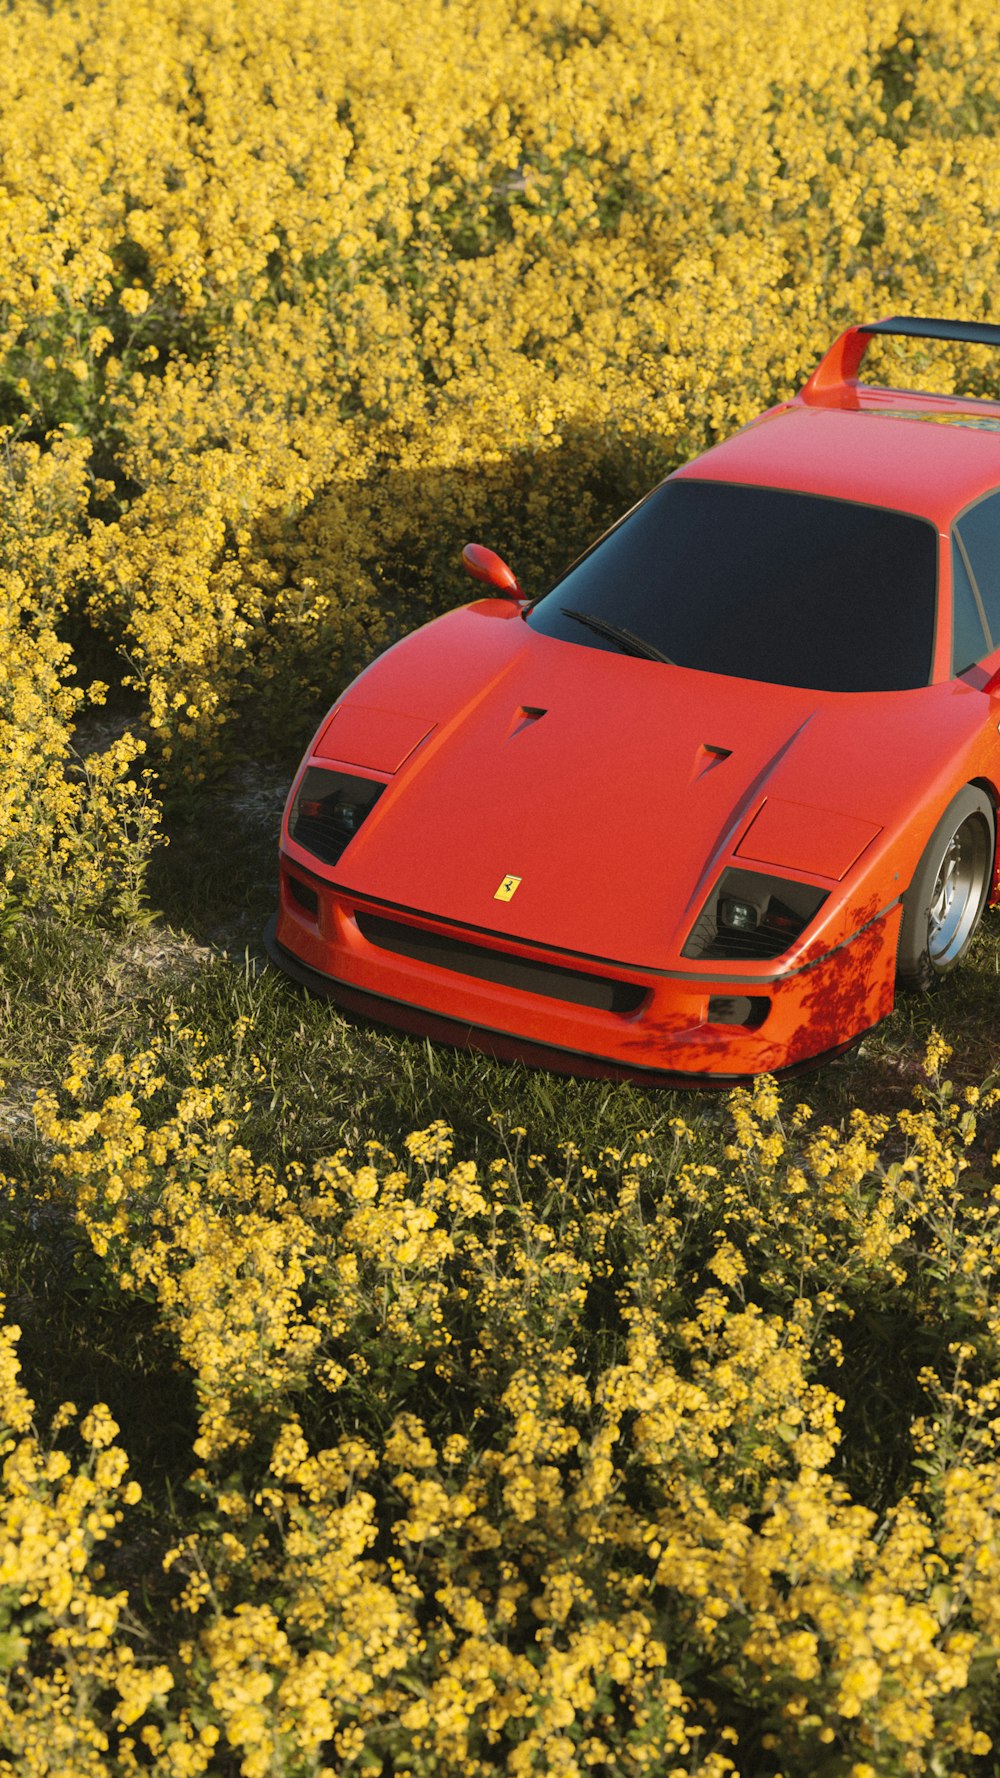 a red sports car parked in a field of yellow flowers